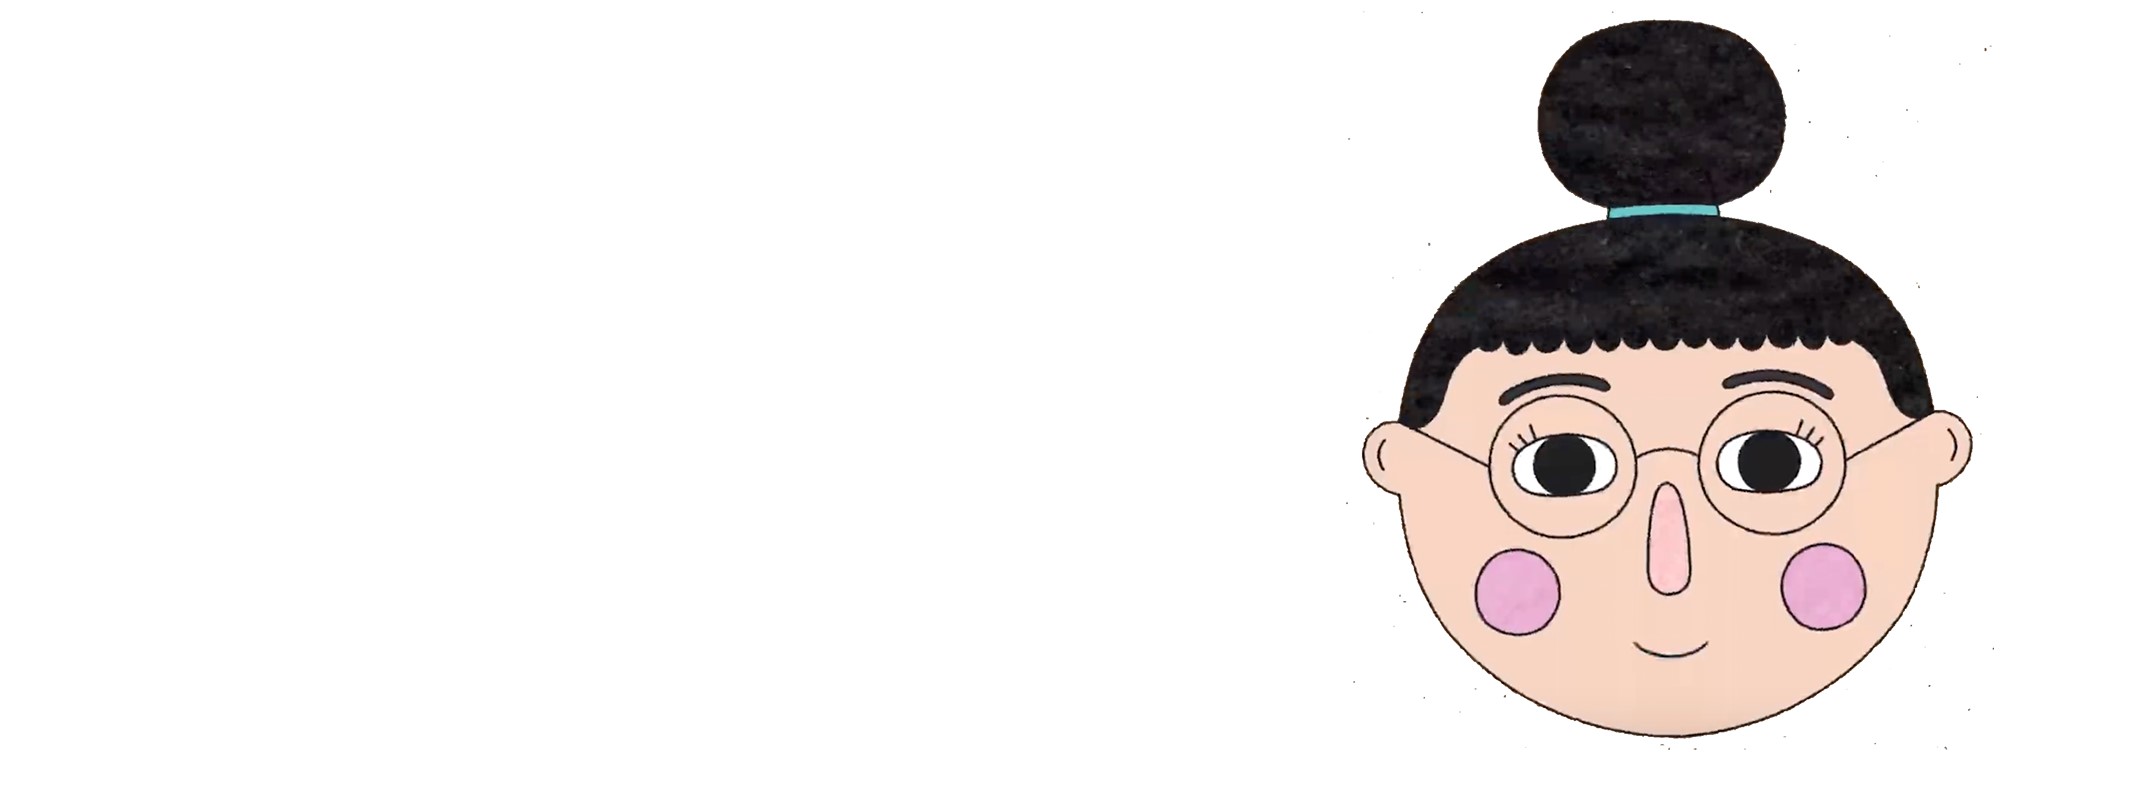 A cartoon head. They are smiling, and are wearing round glasses and have their black hair up in a bun on top of their head.